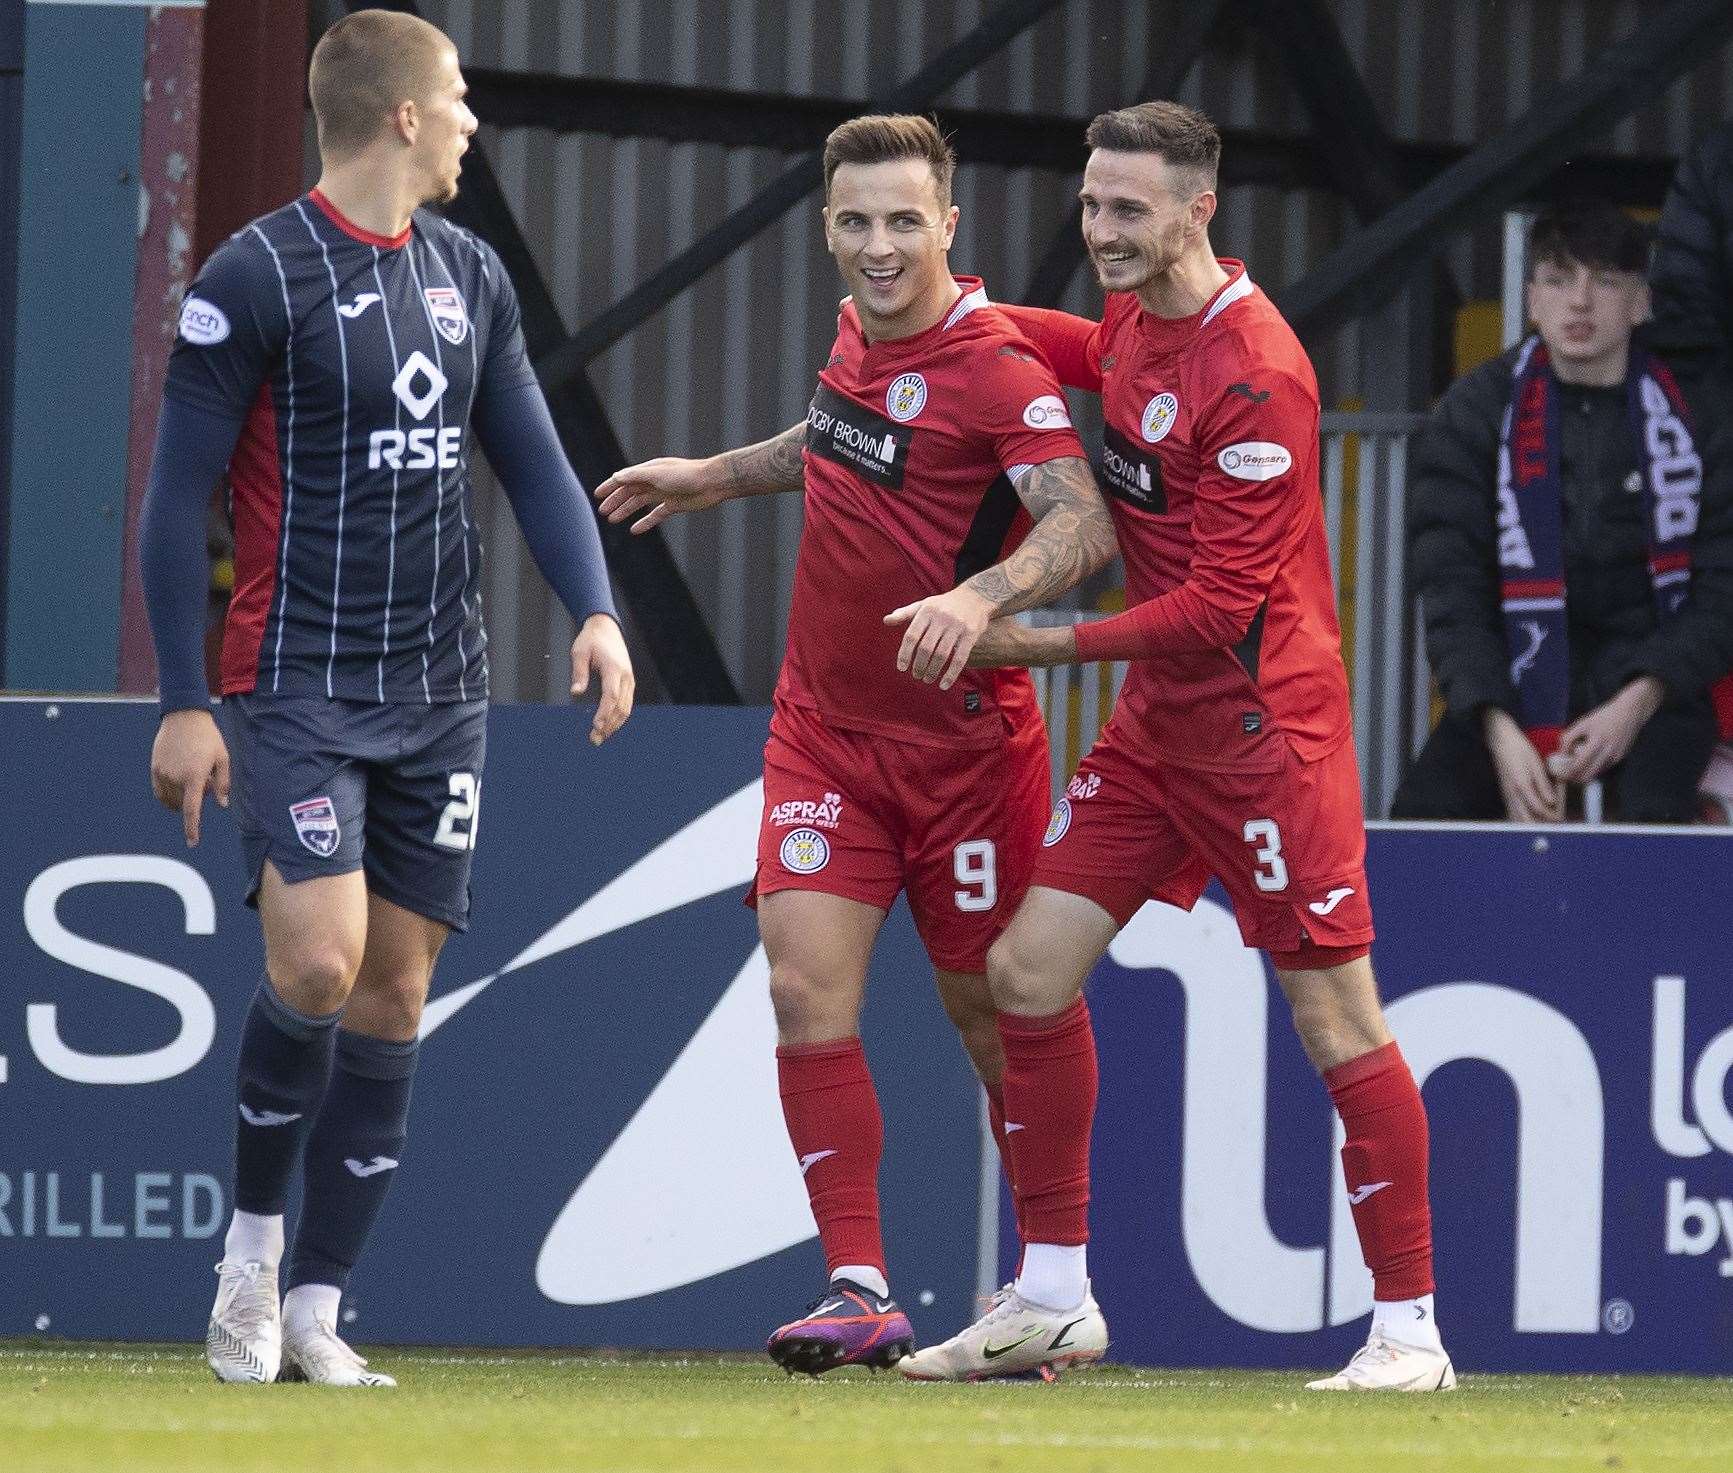 Eamonn Brophy celebrates scoring against County in Dingwall in October 2021. Picture: Ken Macpherson